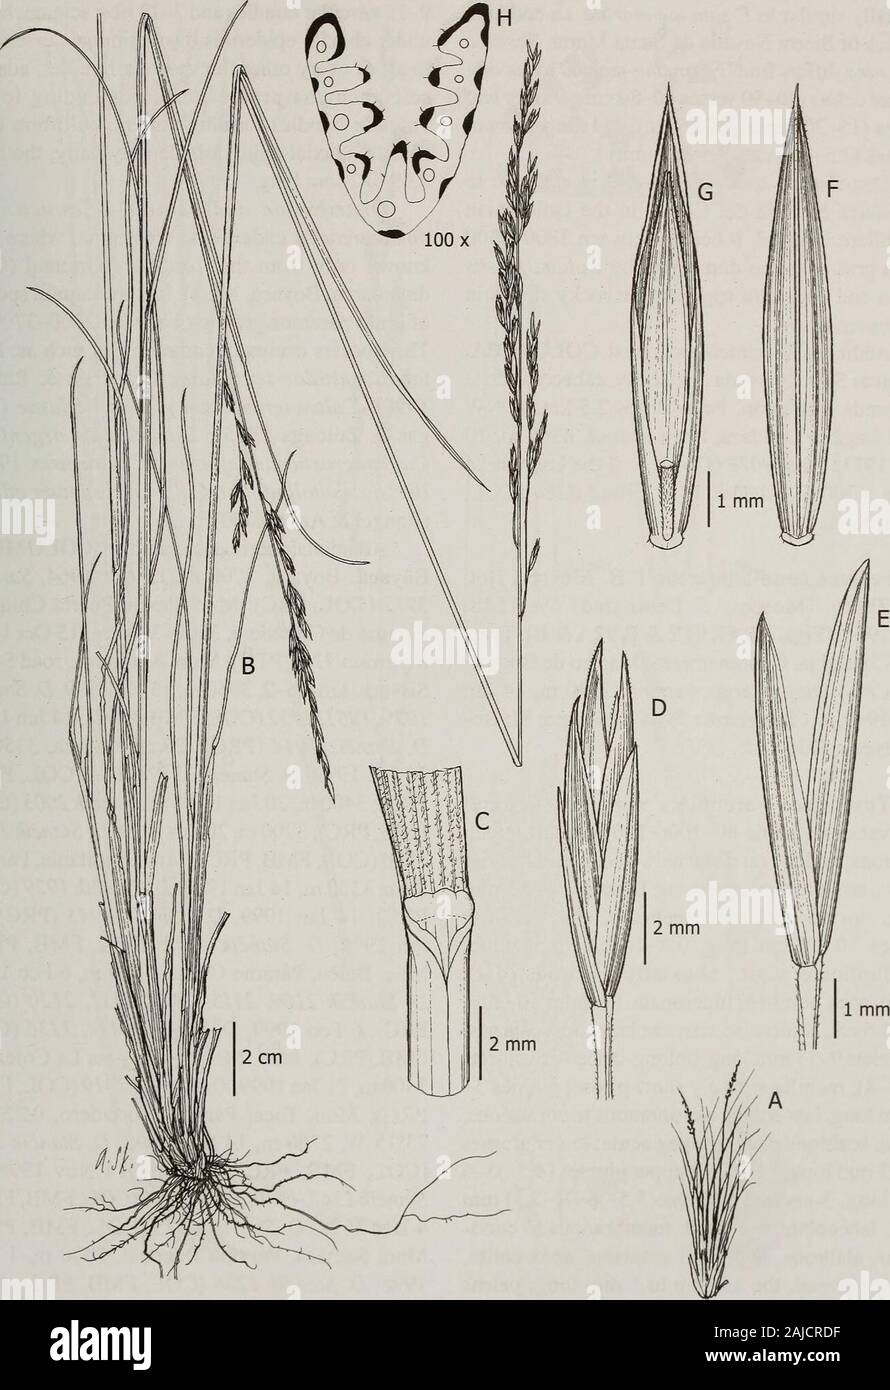 Contributions from the United States National Herbarium . anicles 8-12 cm long, 0.8-1.5 mm wide,contracted, narrow, elongate. Spikelets 10-13 mmlong, lanceolate, florets 2 or 3; rachilla pubescent;glumes 7.5-10.5 mm long, almost as long as thespikelet, lanceolate, membranous, scabrous alongmidnerve, apex acute; lower glumes 7.5-8 mmlong, 1-nerved; upper glumes 7.5-10.5 mm long,3-nerved; lemmas 8-10 mm long, lanceolate,5-nerved, membranous, awnless or short-awned, theawn ca. 0.5 mm long; callus glabrous or sparselyhairy; paleas 3/4 as long as the lemma, papillose,distally scabrous; lodicules 1- Stock Photo